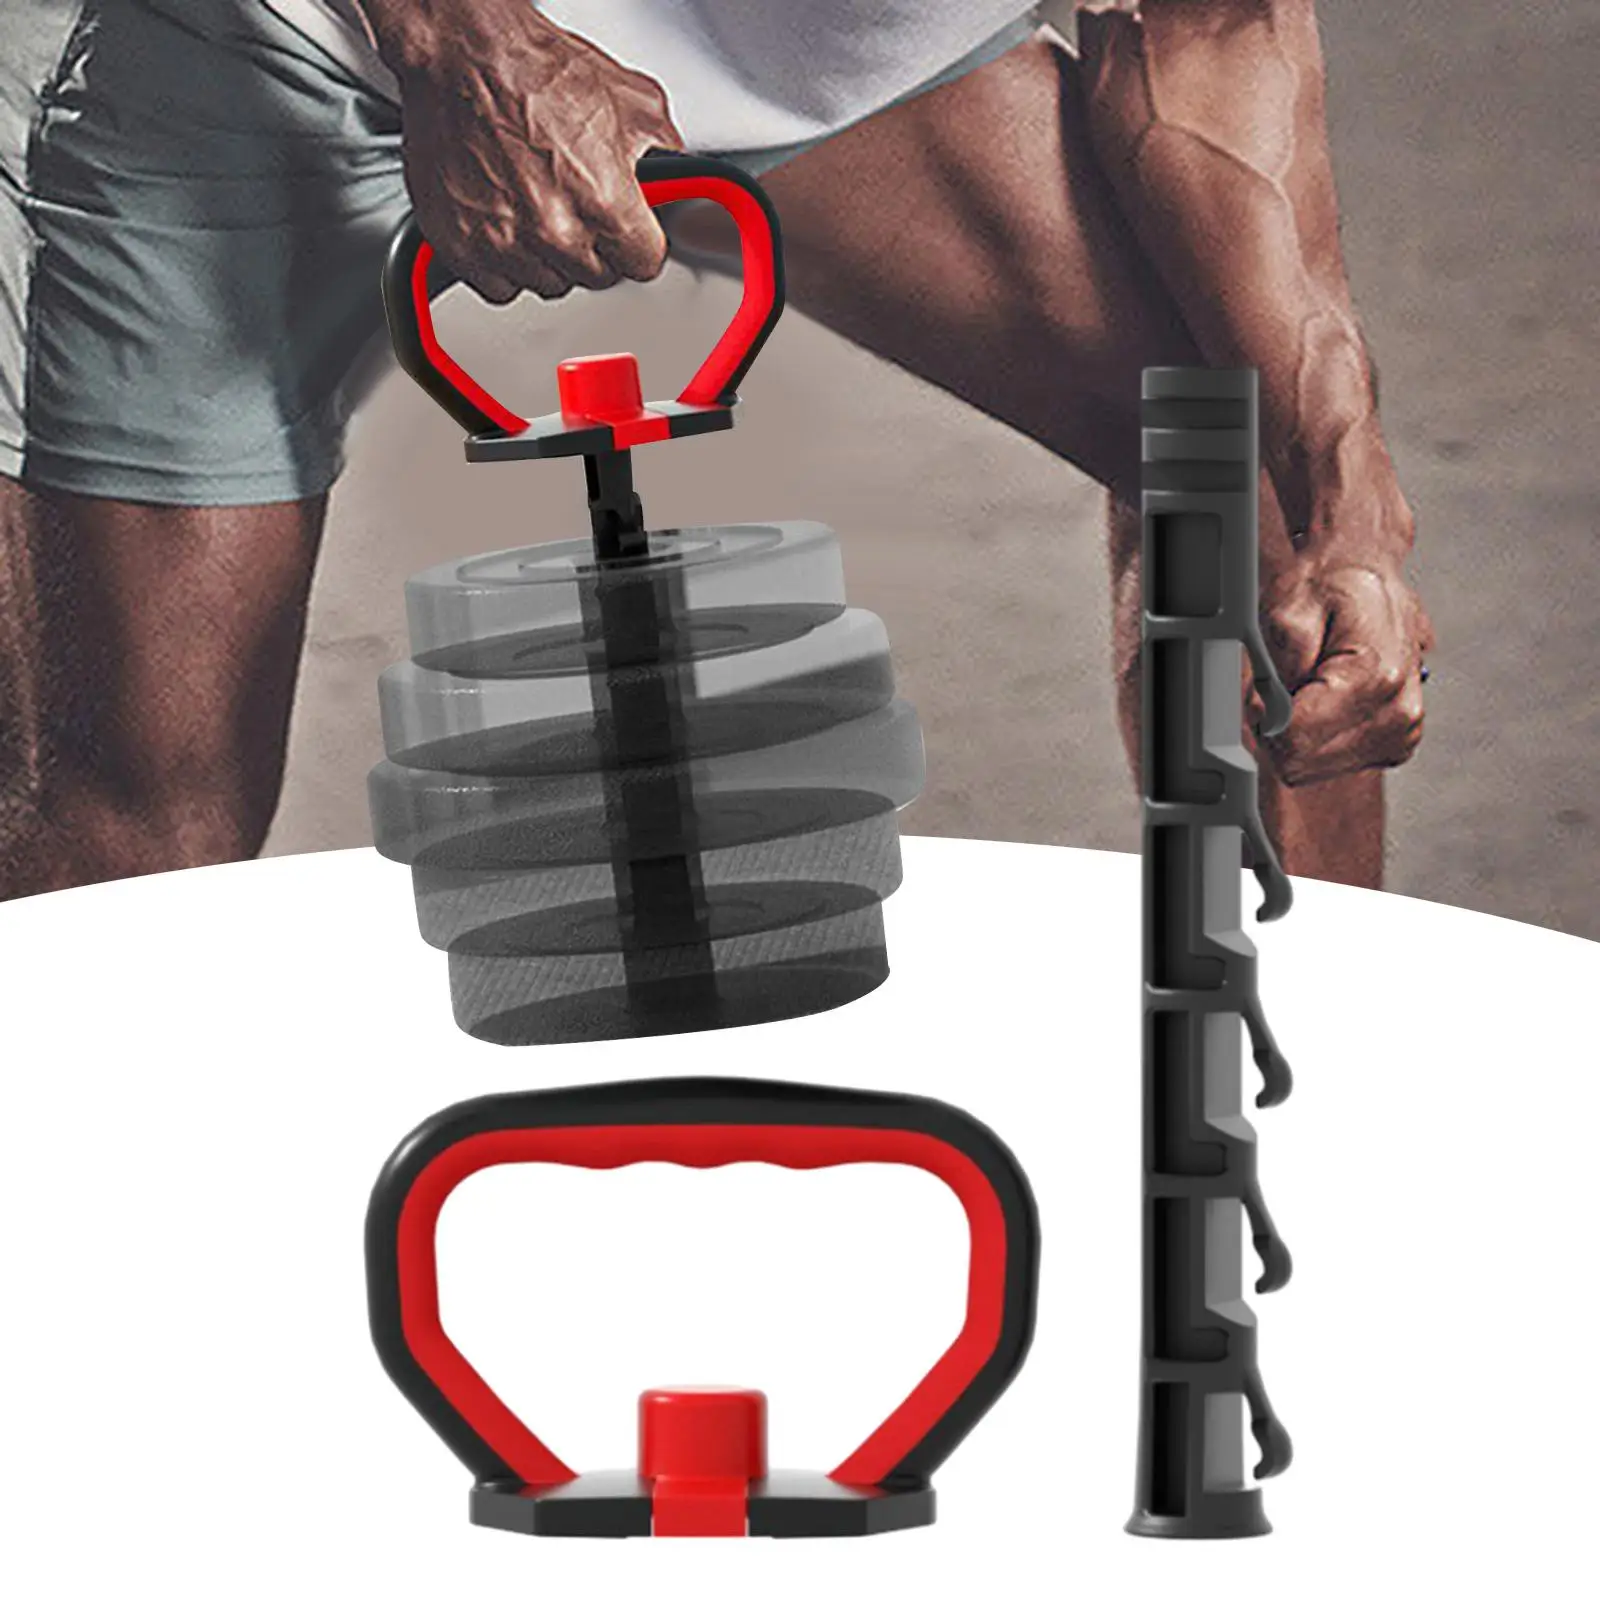 Kettle Bell Grip Handle Adjustable Fitness Strength Training Grips Handle